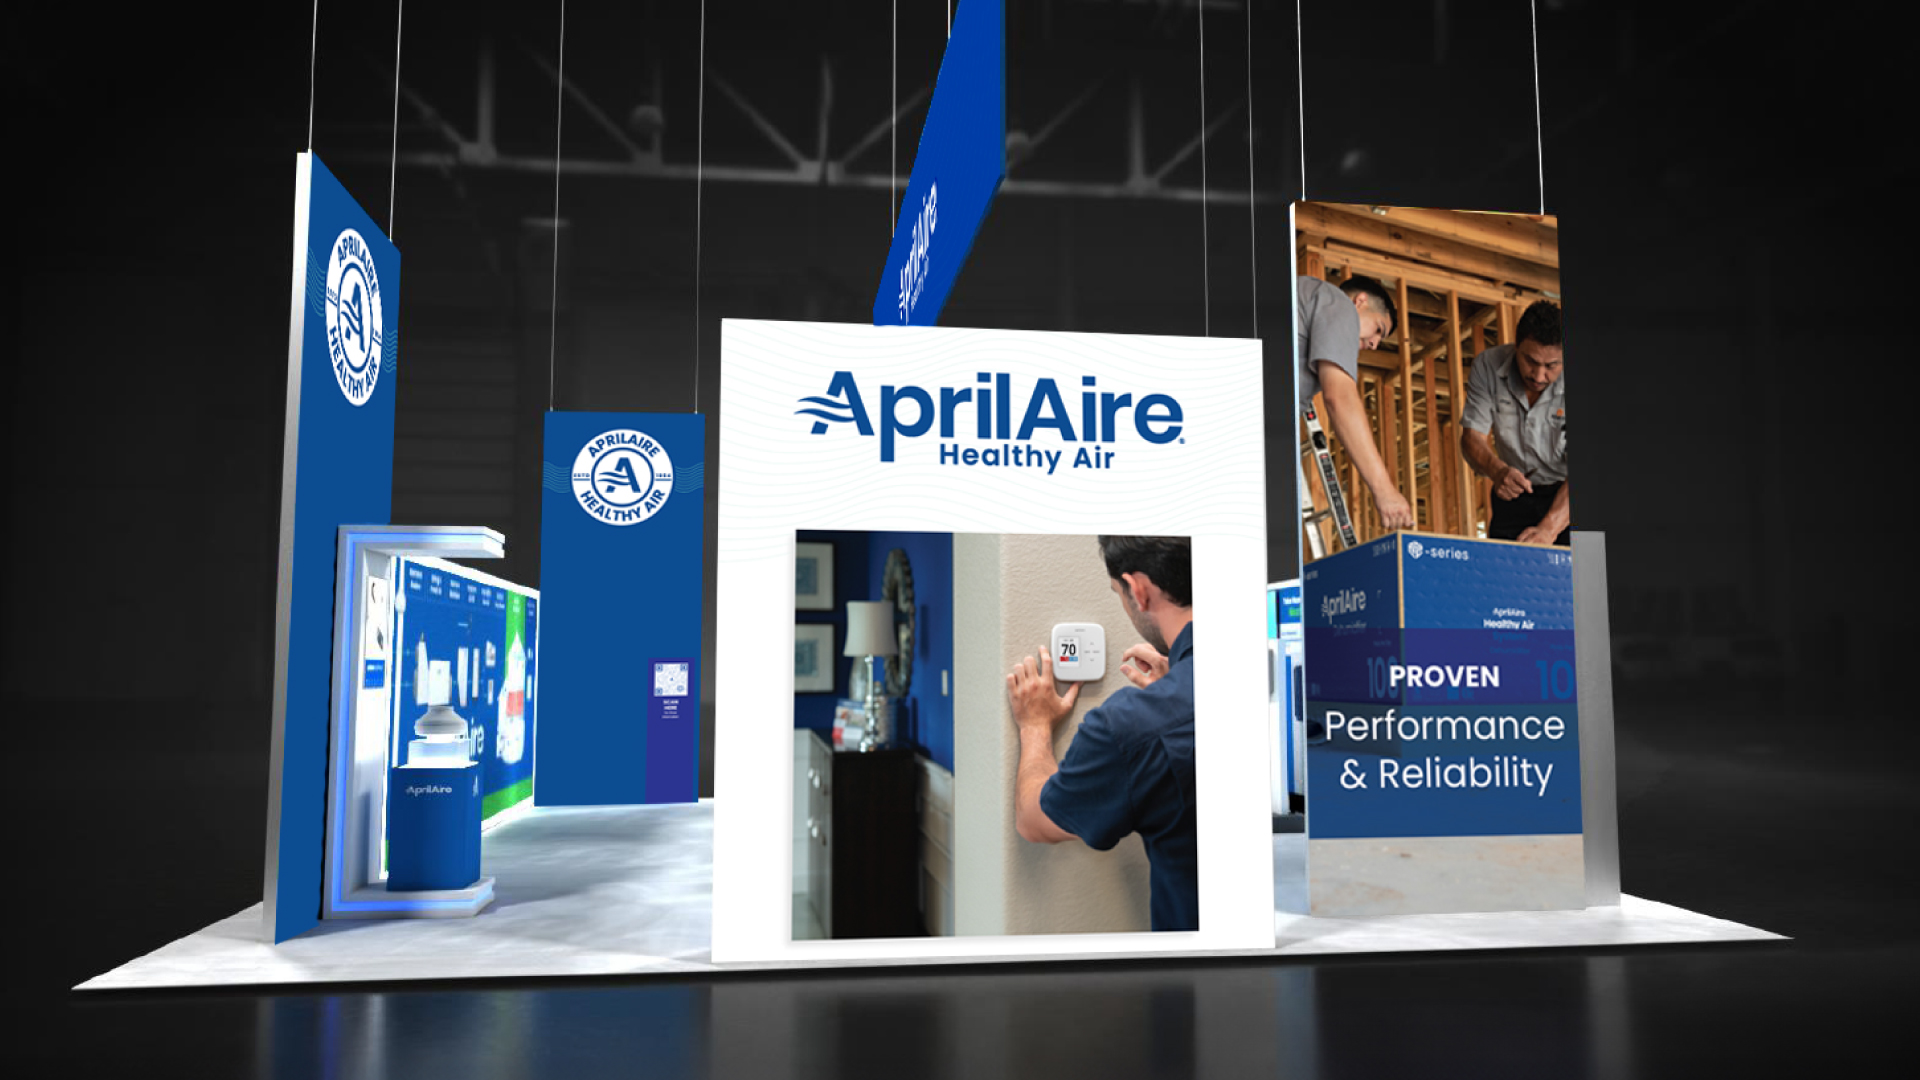 Aprilaire Healthy Air